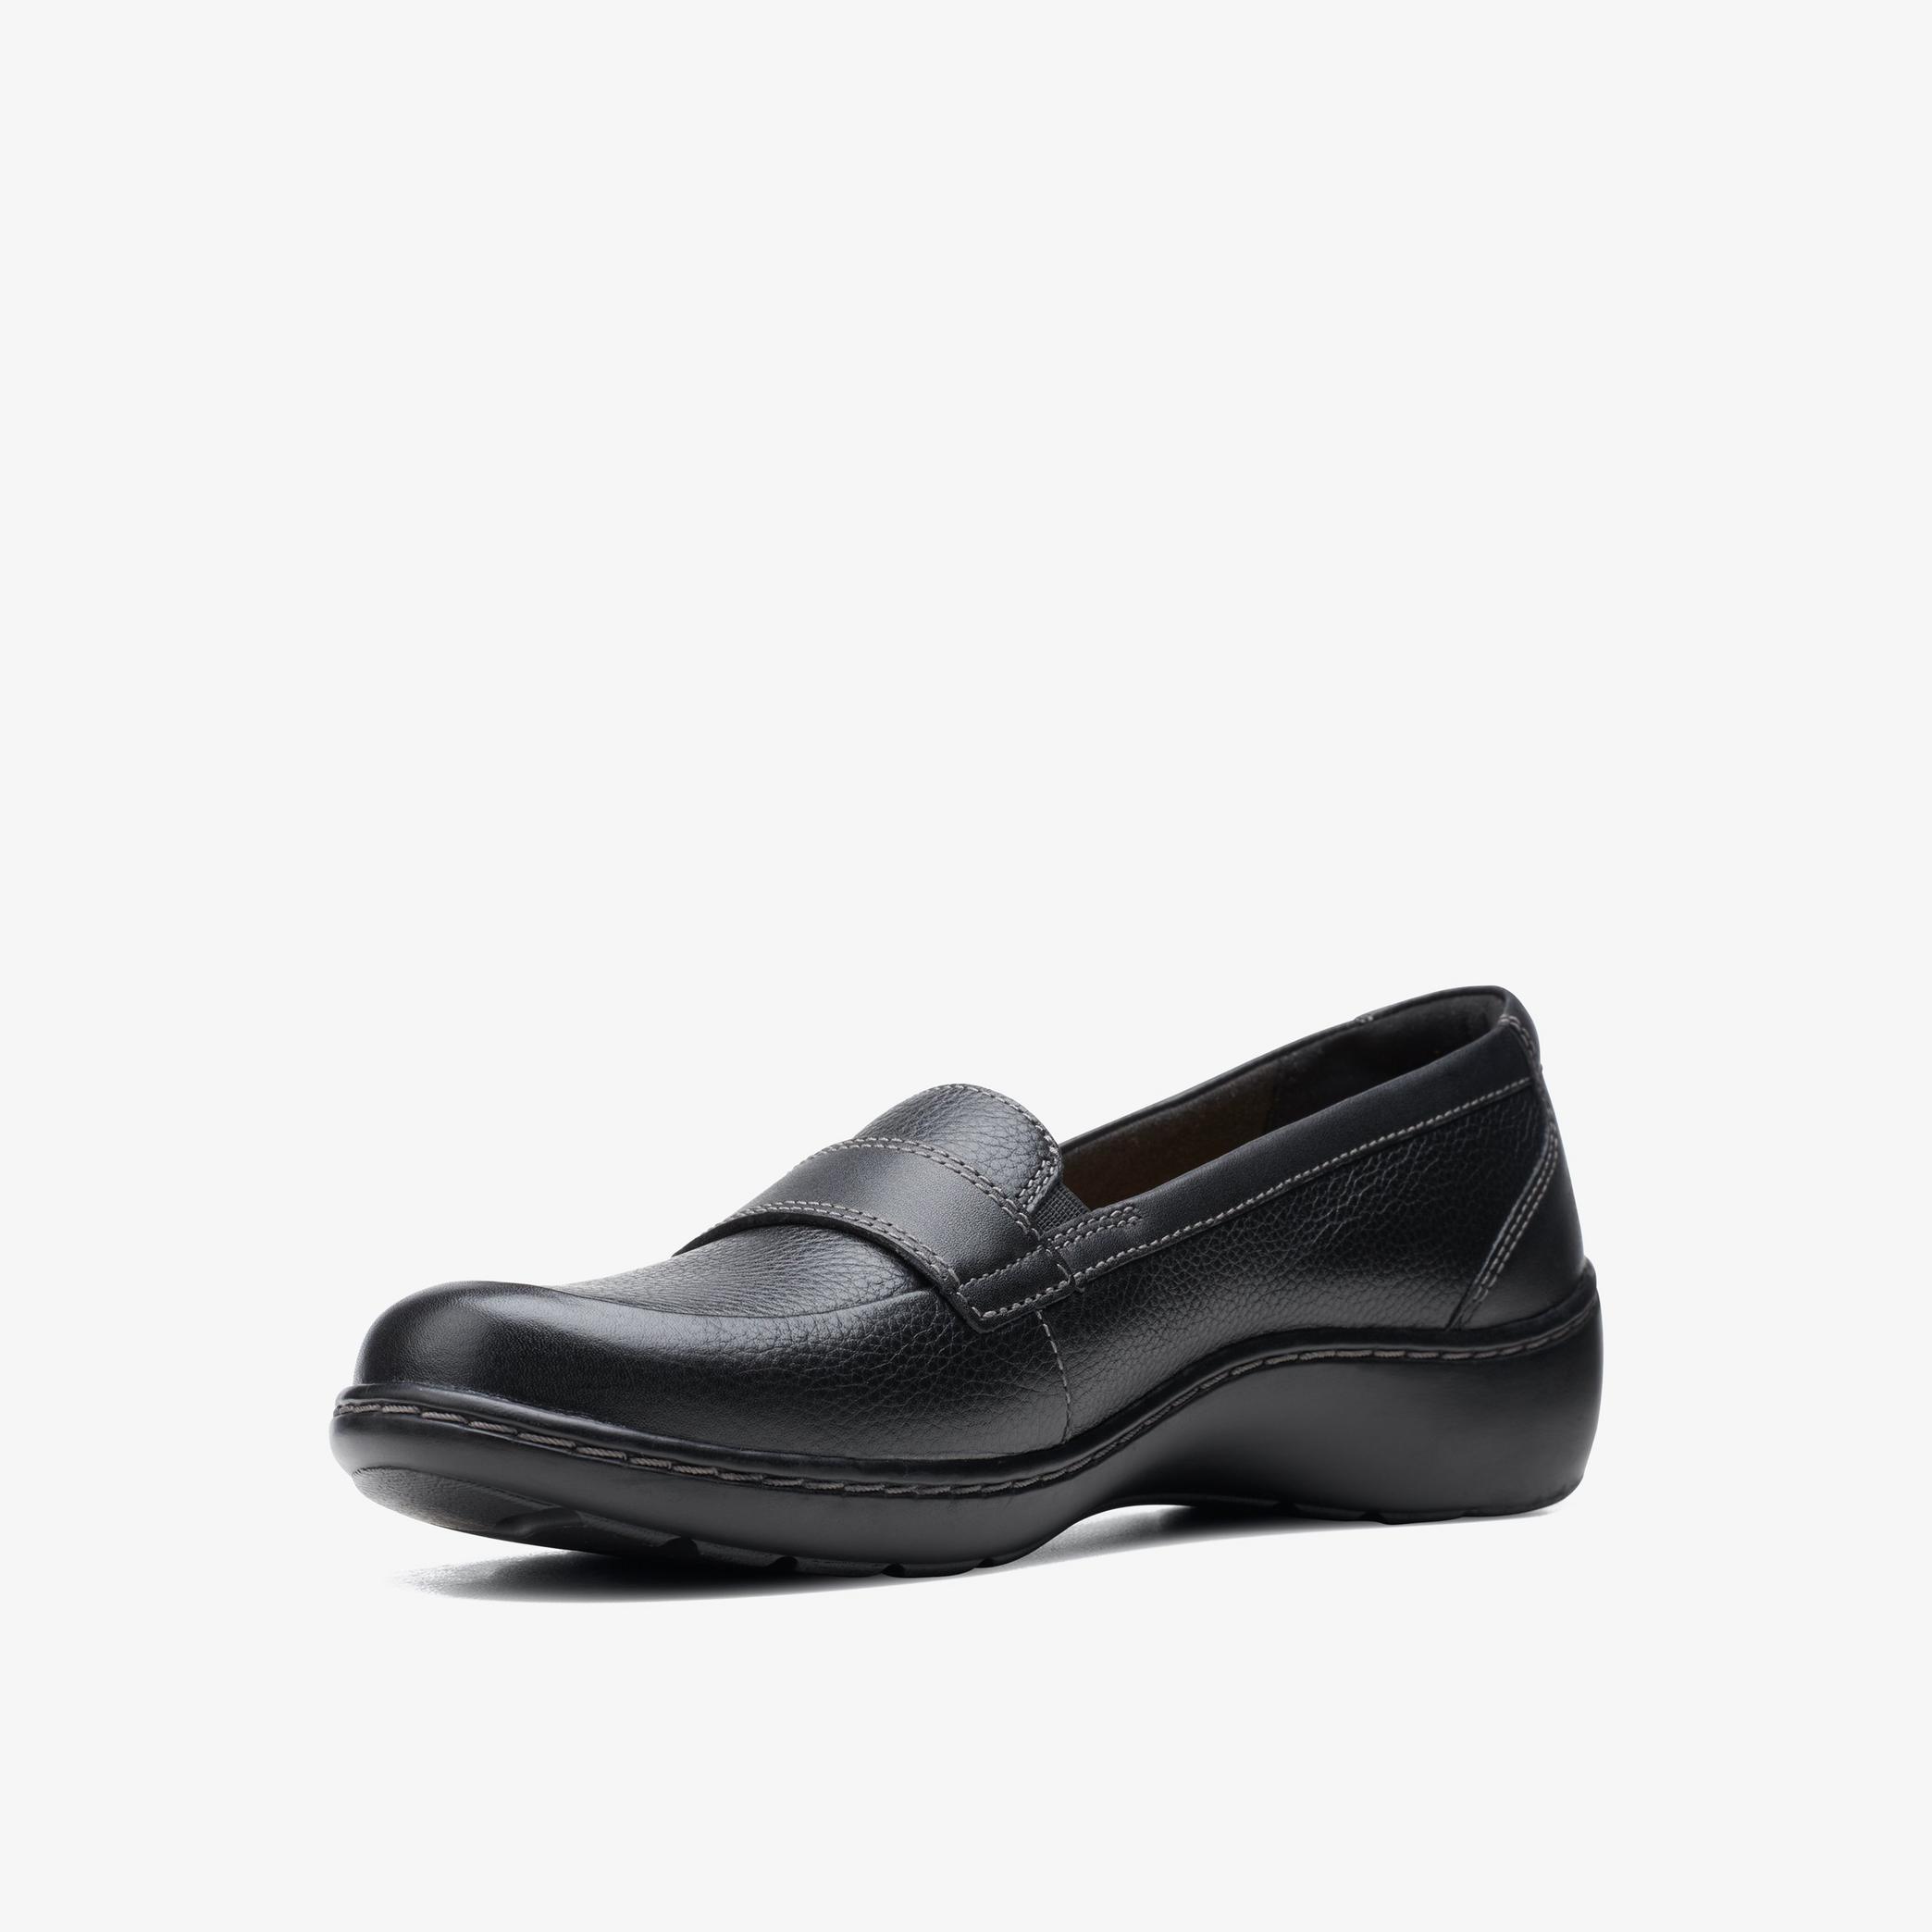 Cora Daisy Black Tumbled Loafers, view 4 of 6